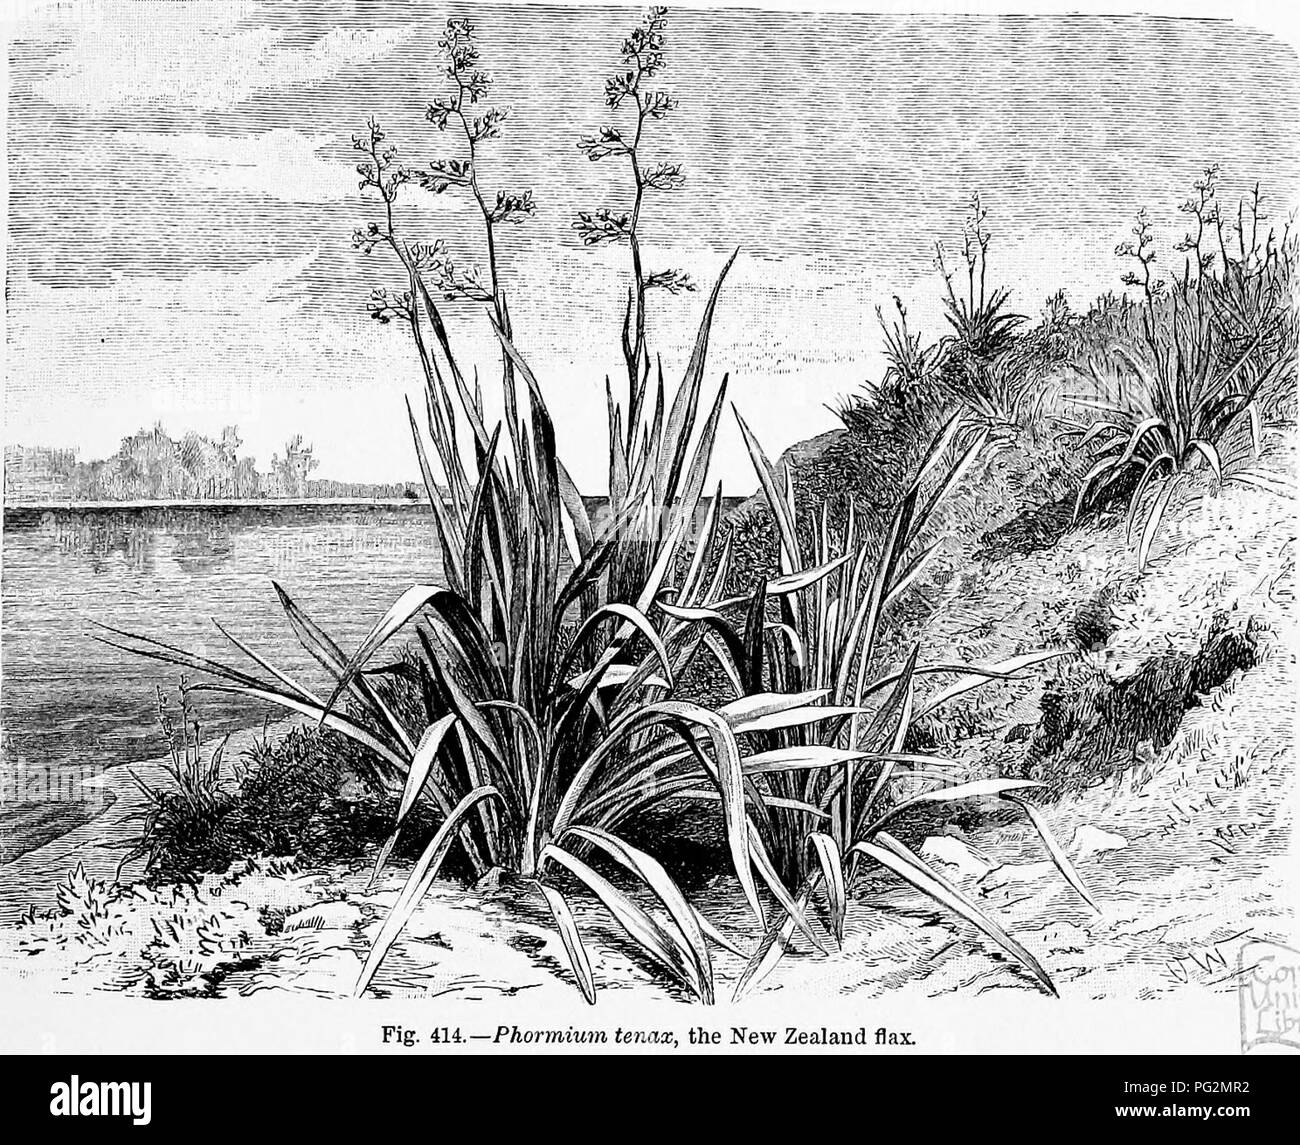 . The natural history of plants, their forms, growth, reproduction, and distribution;. Botany. ANGIOSPERM^, MONOCOTYLEDONES. 731 Liliastrum, a beautiful alpine plant; Hemerocallis, the Day Lily; Phormium tenax, the New Zealand Flax (fig. 414), the leaves of which yield a valuable fibre; Kniphofia, whose dense spikes resemble a red-hot poker, cultivated in gardens; the Aloes and their allies, chiefly African, with a permanent aerial branch-system; finally, the Australian Grass-trees (e.g. Xanthorrhcea hastilis, shown in Plate XVI.), often a conspicuous feature in the landscape, and with its lon Stock Photo